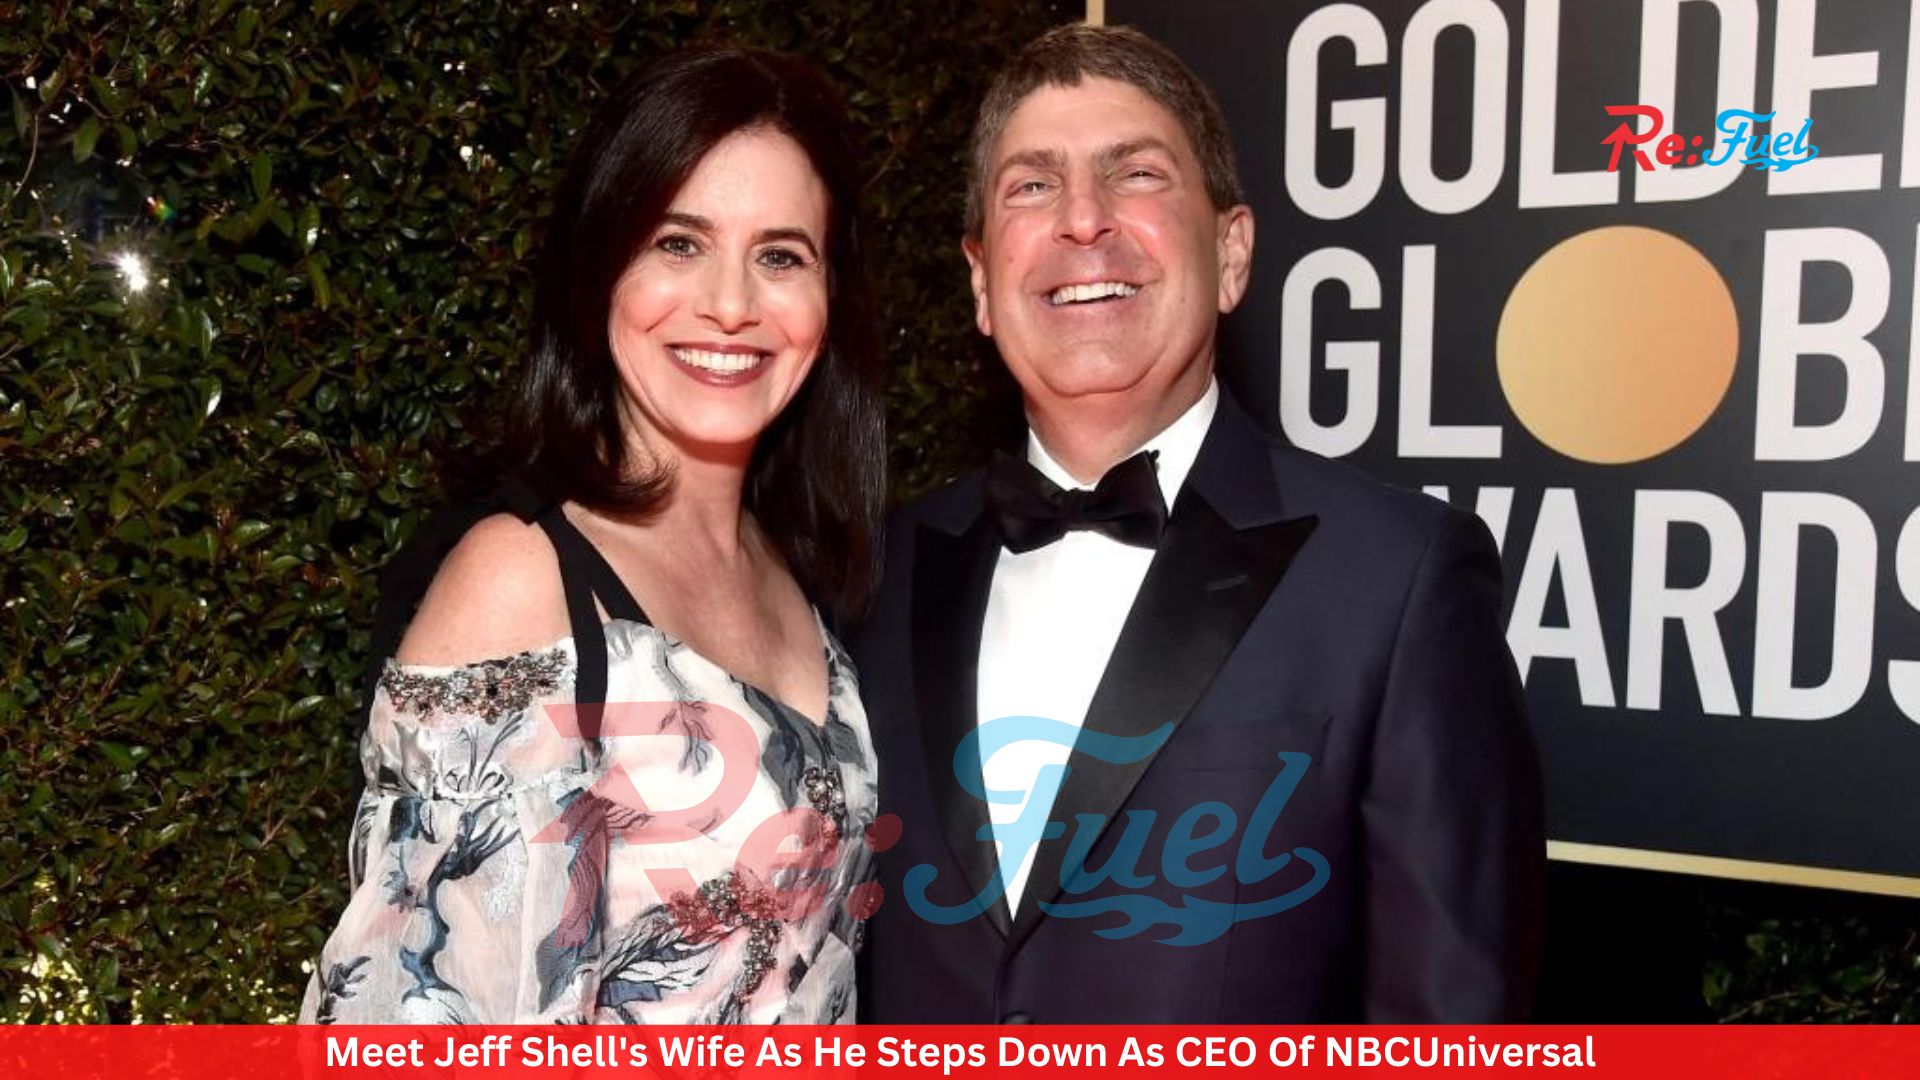 Meet Jeff Shell's Wife As He Steps Down As CEO Of NBCUniversal